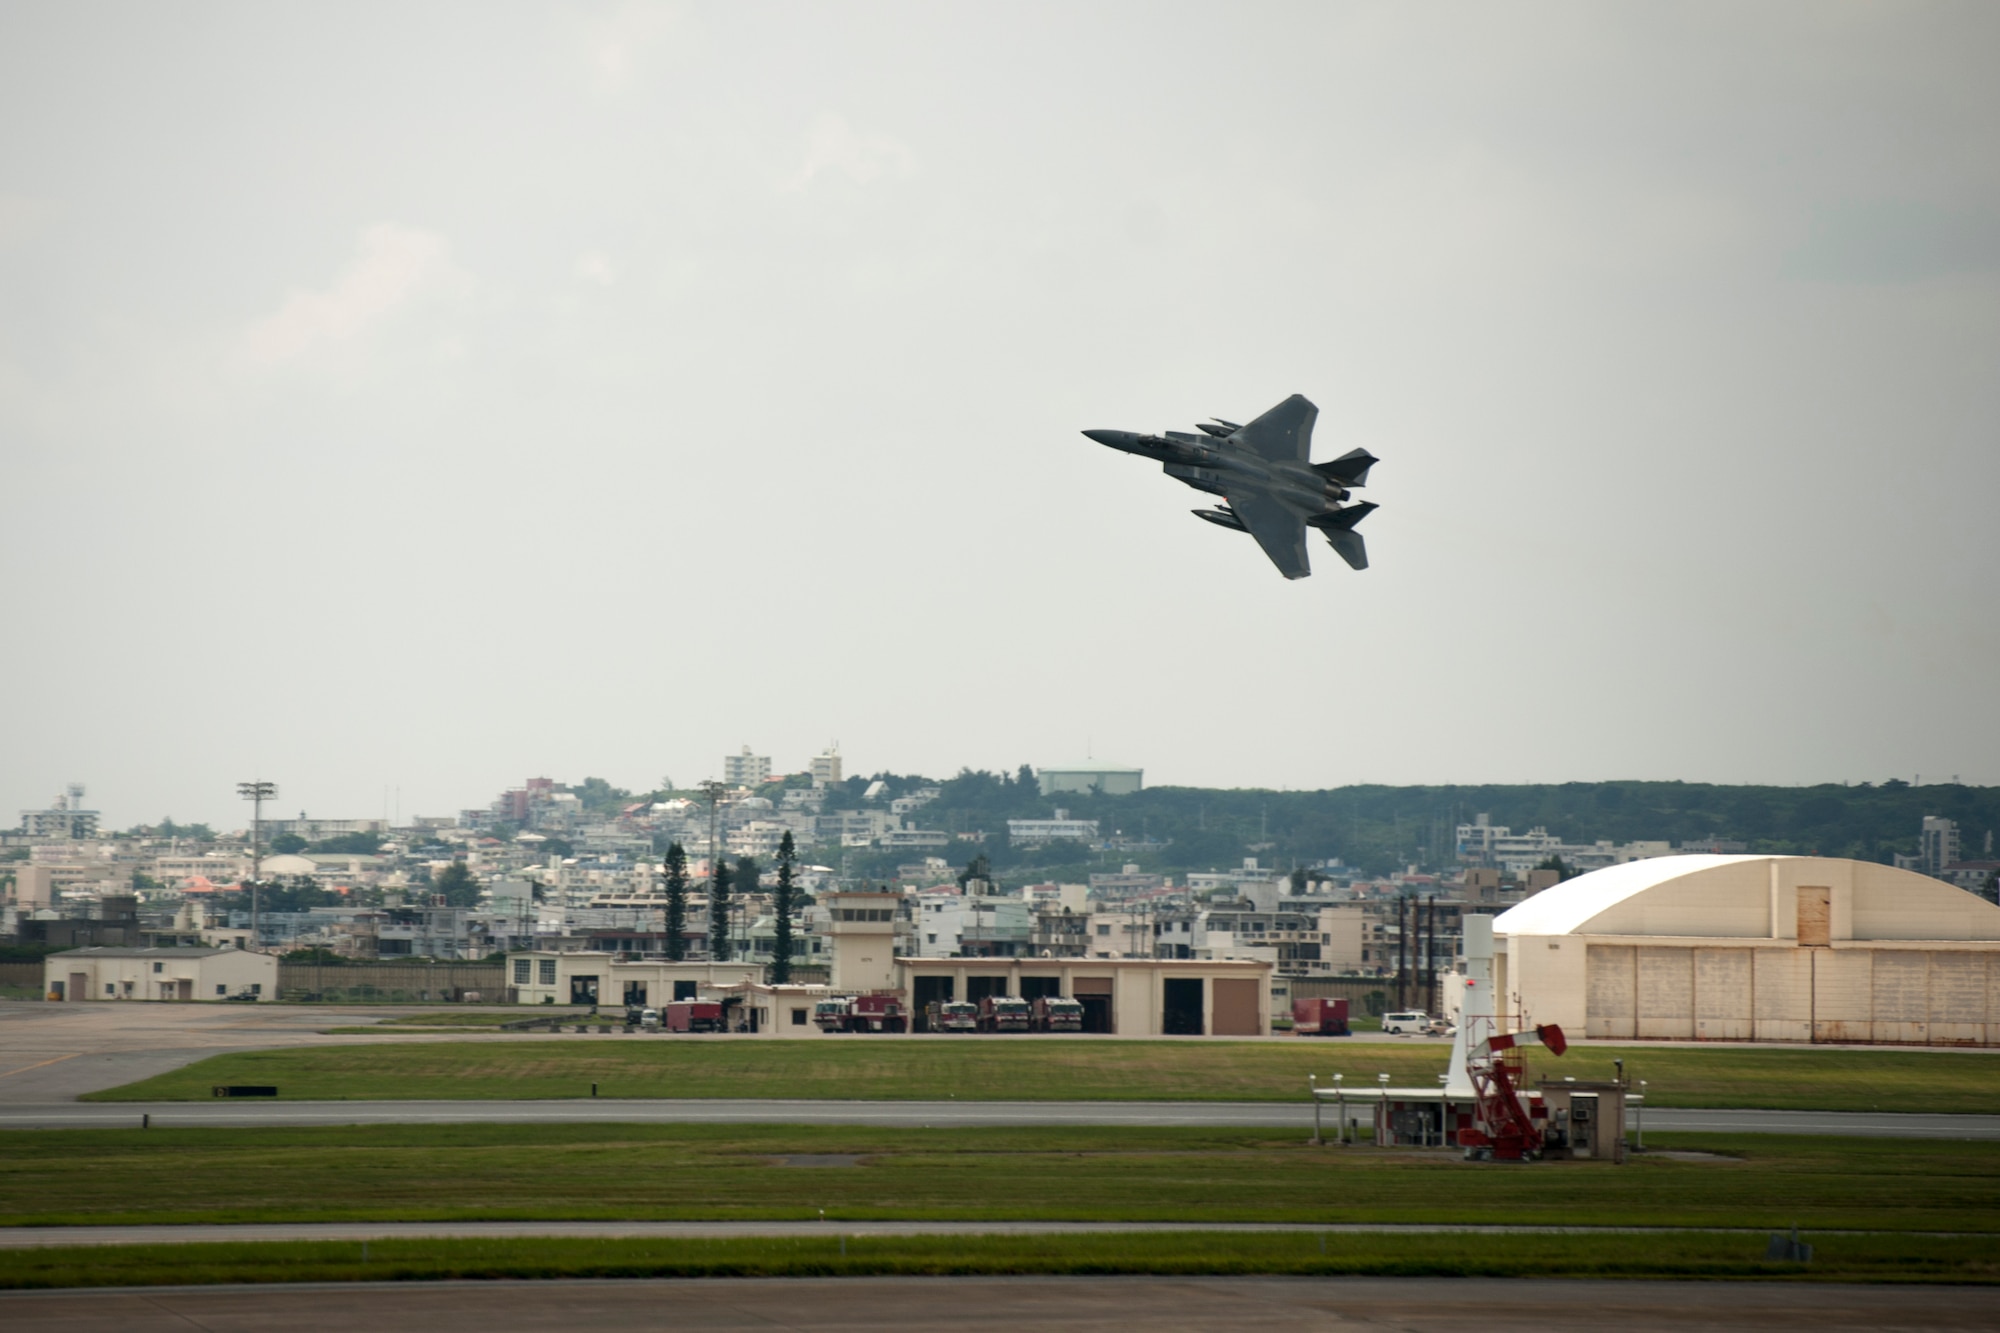 An F-15 Eagle assigned to the 44th Fighter Squadron performs a flyby over the flight line July 28, 2016, at Kadena Air Base, Japan. The 18th Wing hosts a fleet of 81 combat-ready aircraft and remains at constant readiness to respond at a moment’s notice to crisis and conflict anywhere in the Indo-Asia Pacific region. (U.S. Air Force photo by Senior Airman Peter Reft)